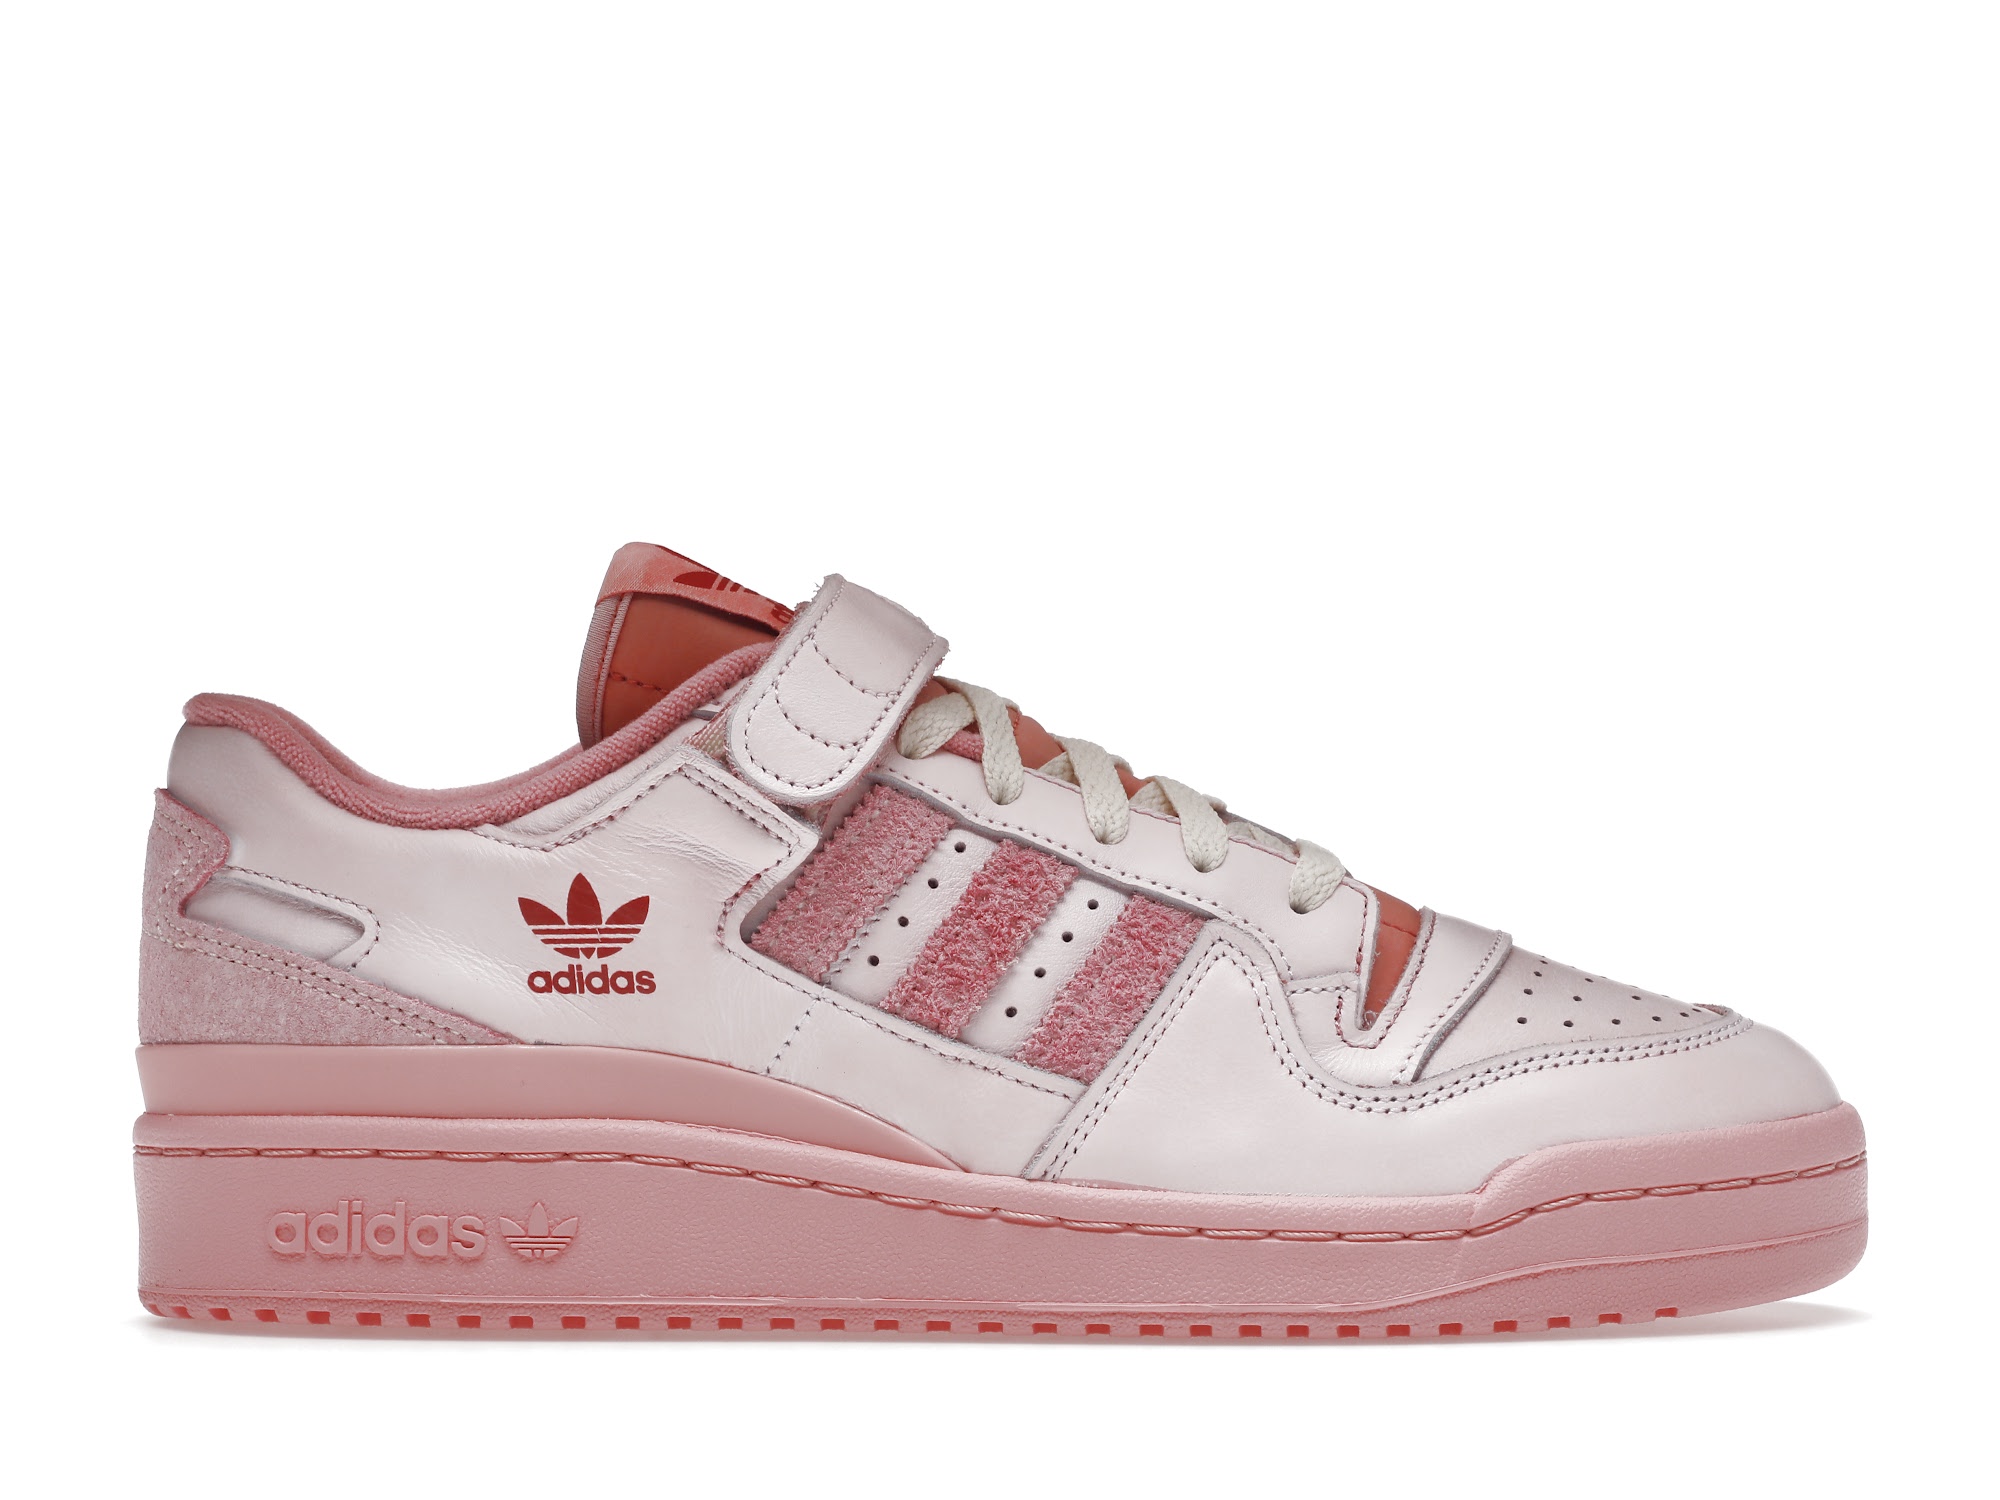 adidas Forum 84 Low Pink at Home